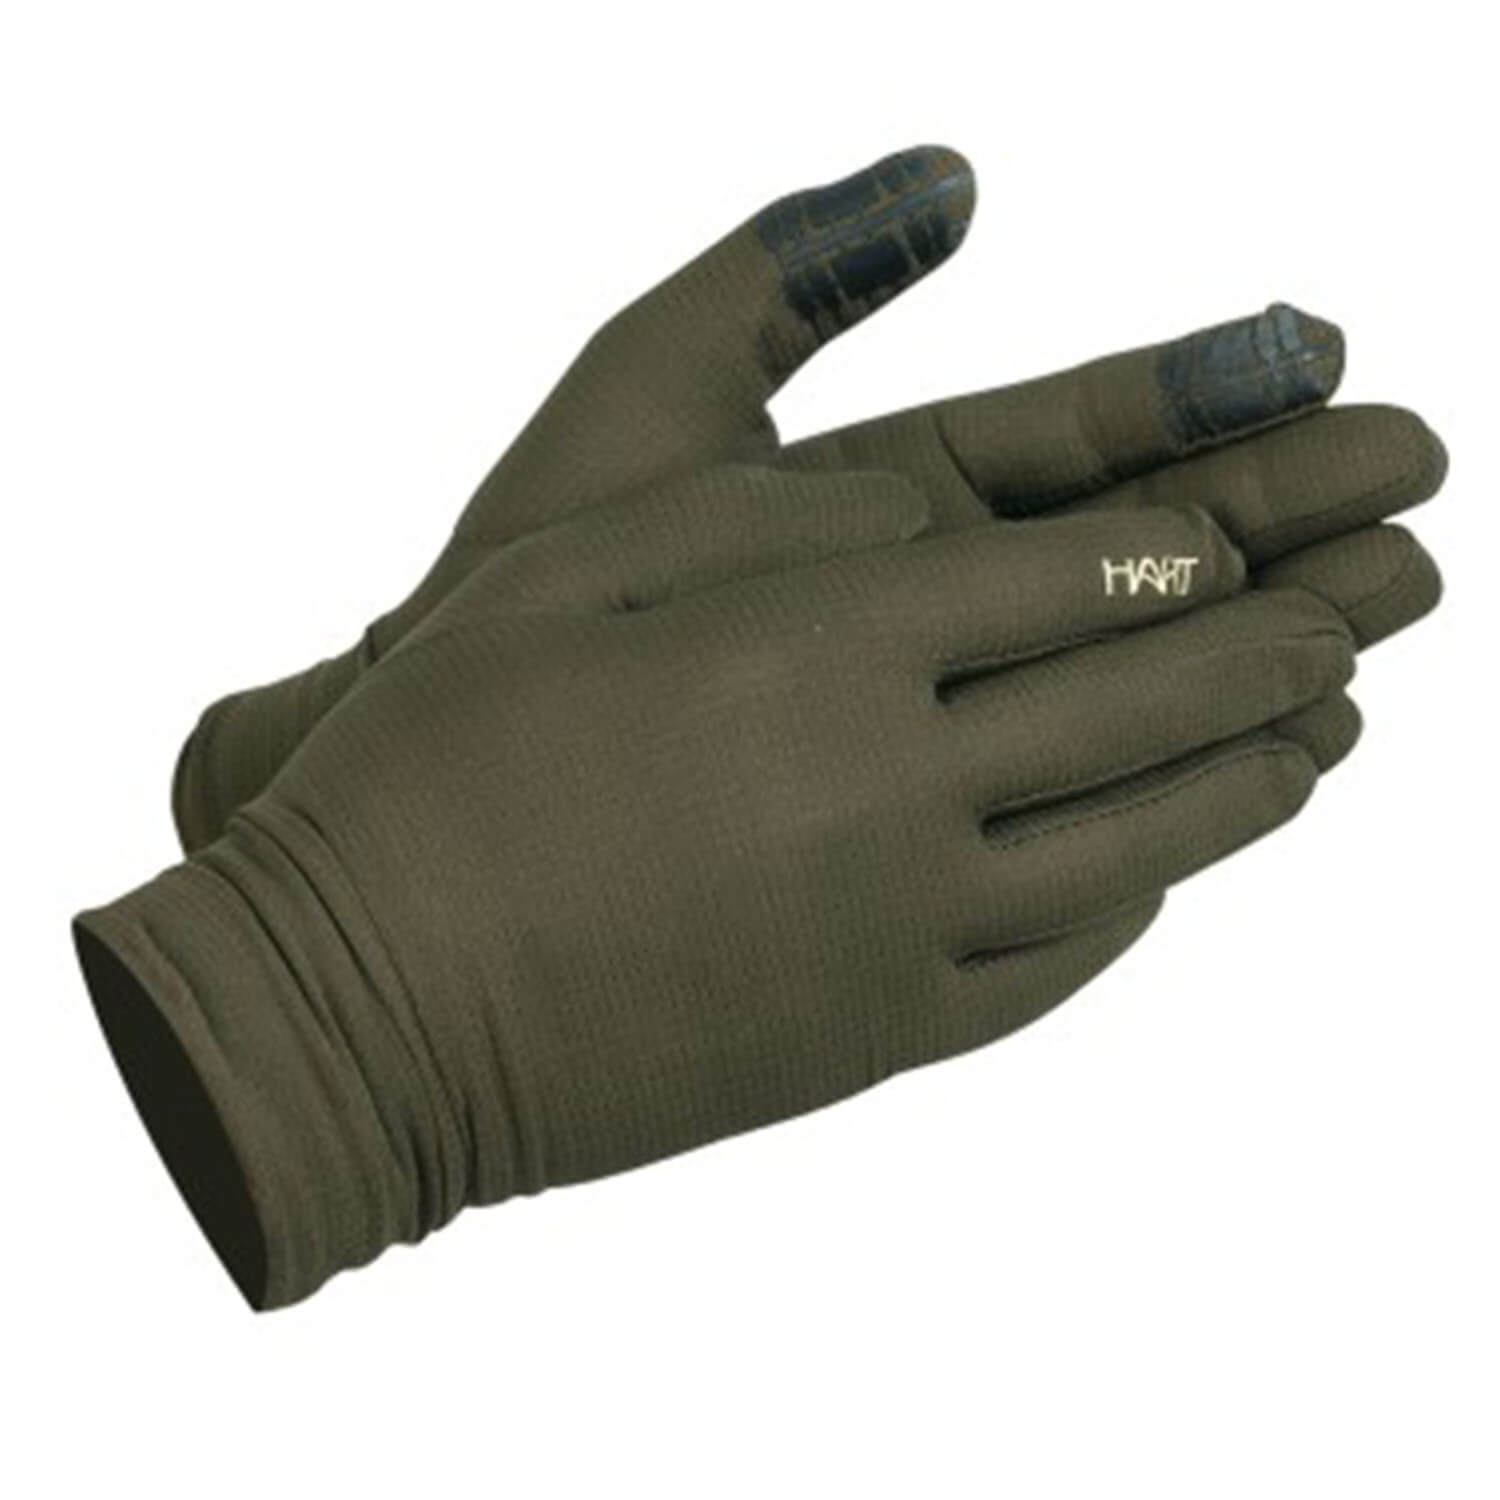  Hart Gloves Ural-GC Cover Ultralight (Green) - Insect Protection